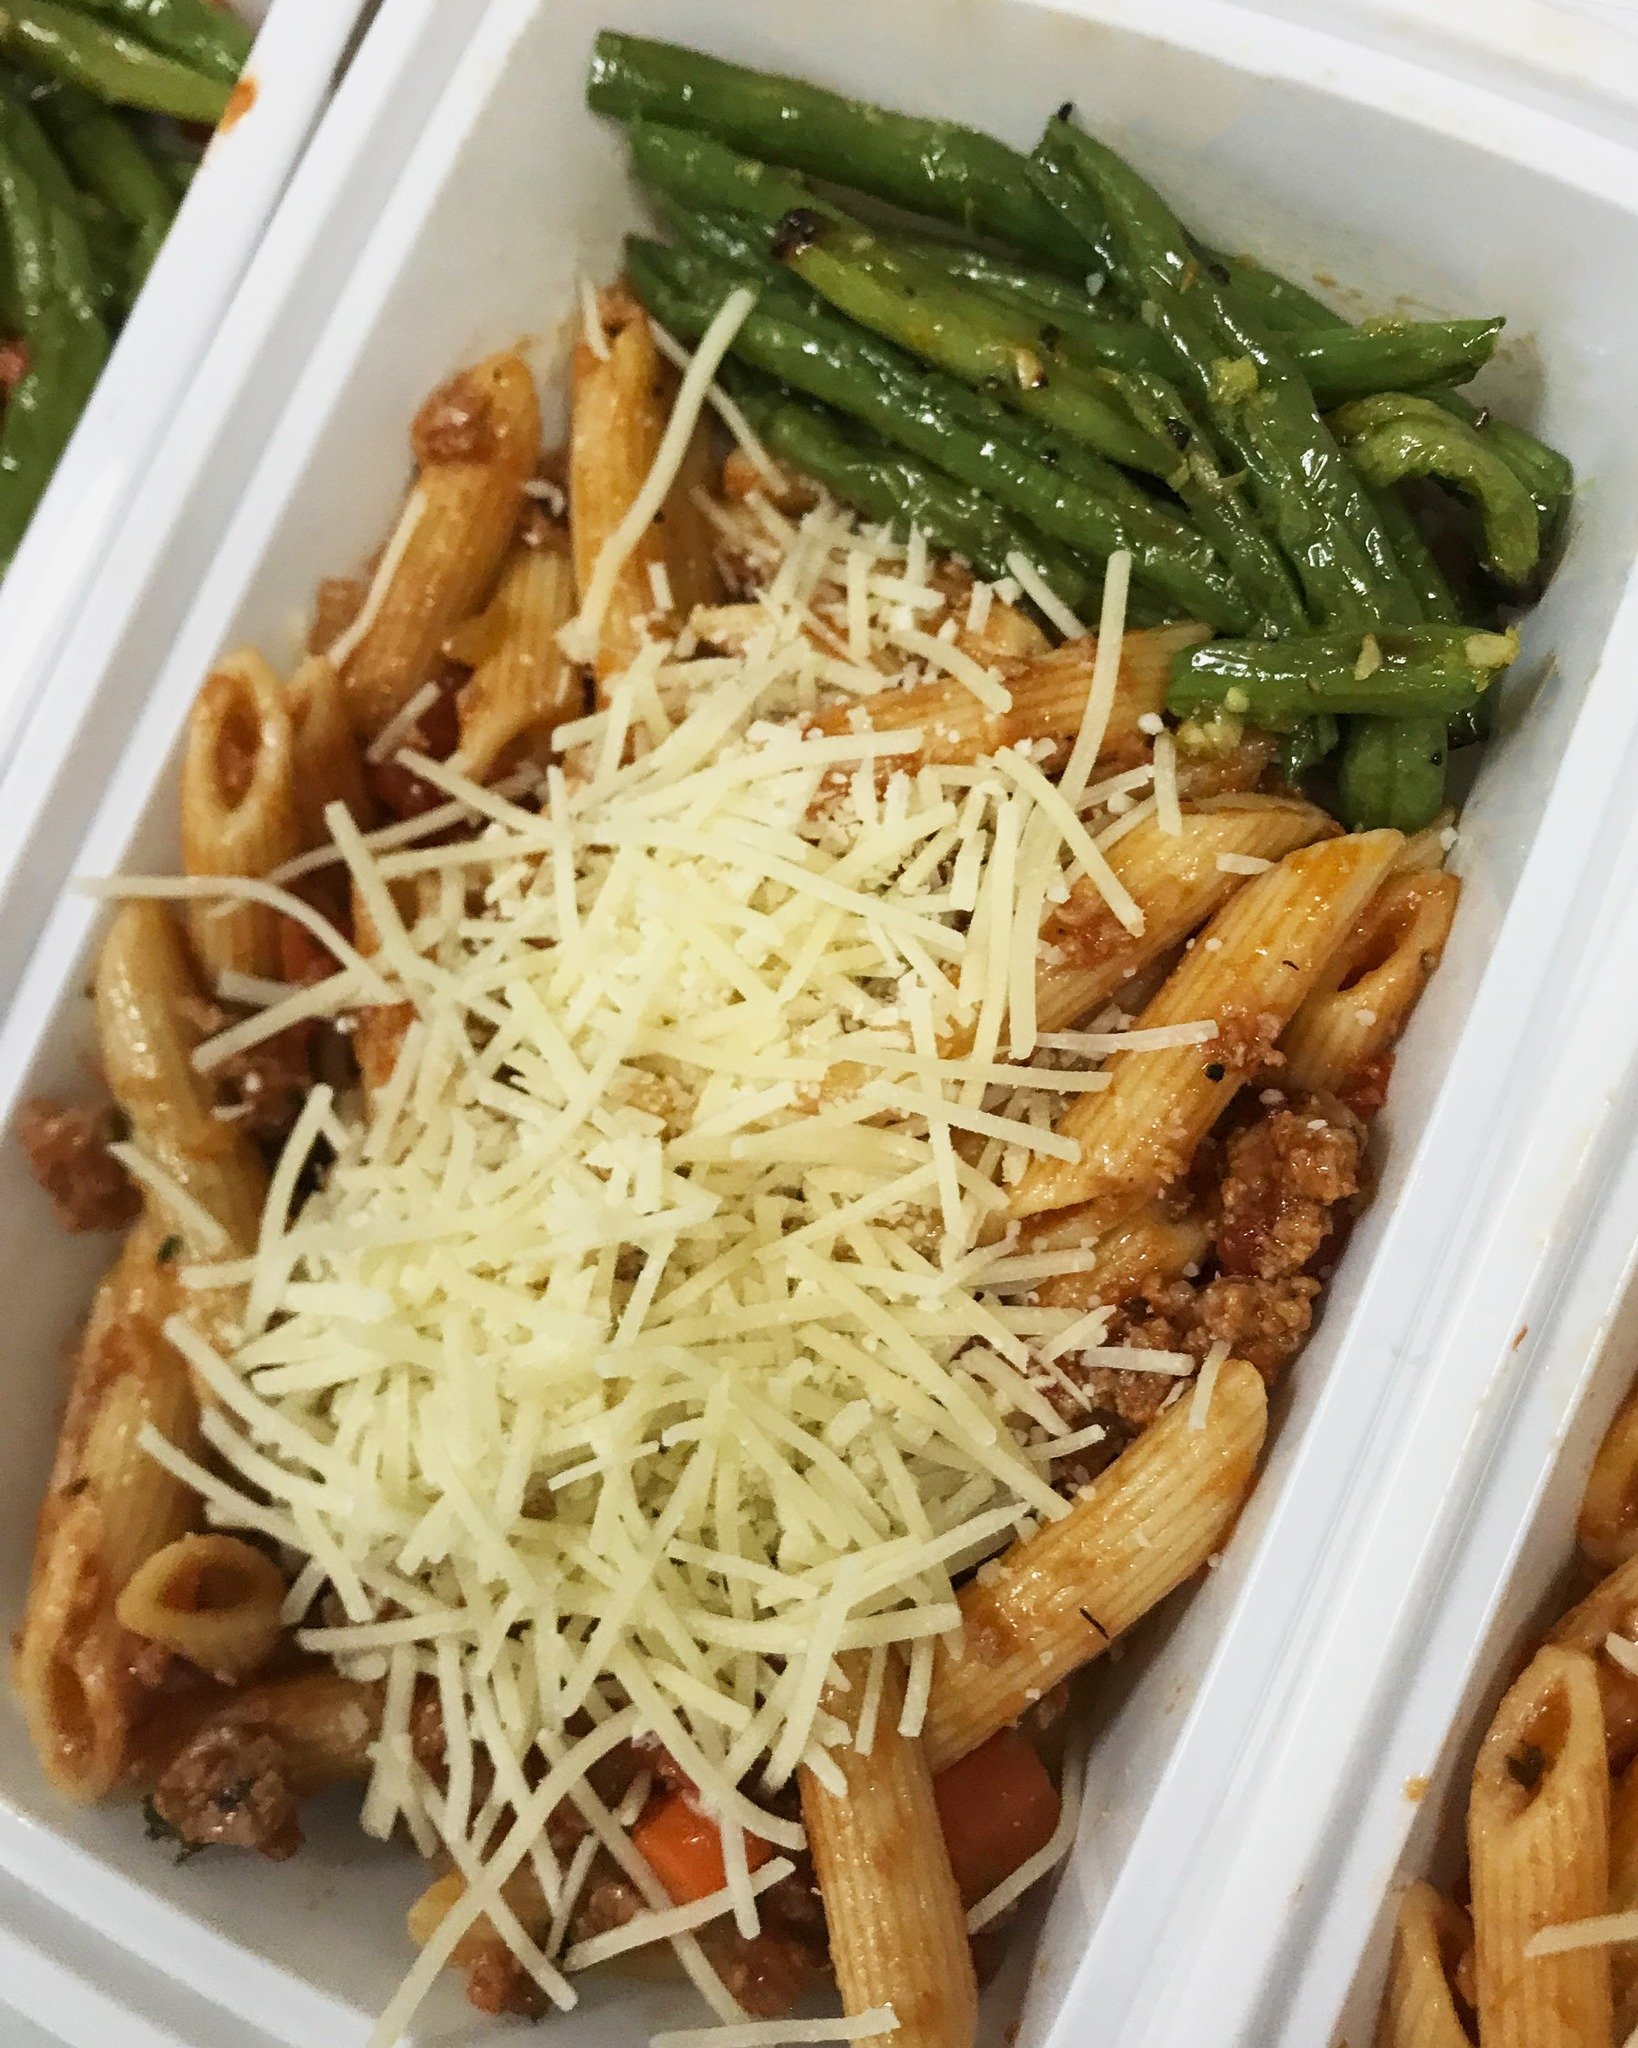 Our turkey Bolognese with penne and lemon garlic green beans is a hearty and comforting meal. Did you know that our meals only use chicken and turkey as our meat proteins? These lean meats provide more nutrients during recovery than pork and beef.

I